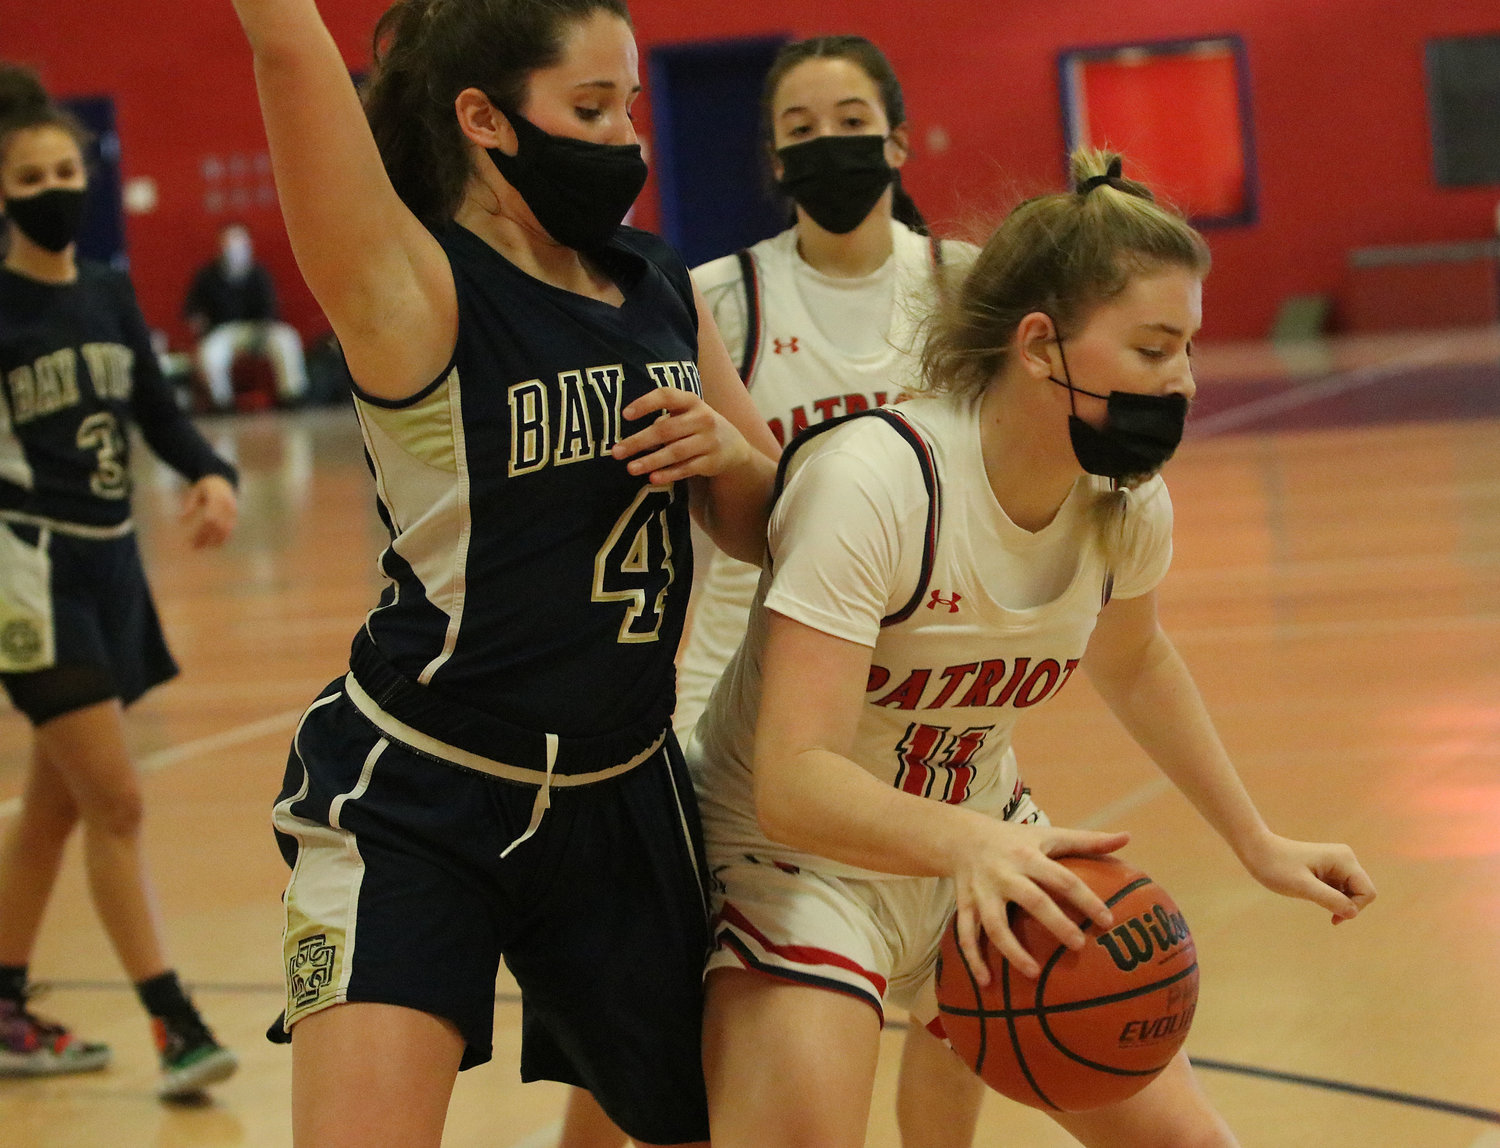 Patriots forward Maeve Tullson puts the ball on the floor in the offensive zone, with Olivia Durant looking on.